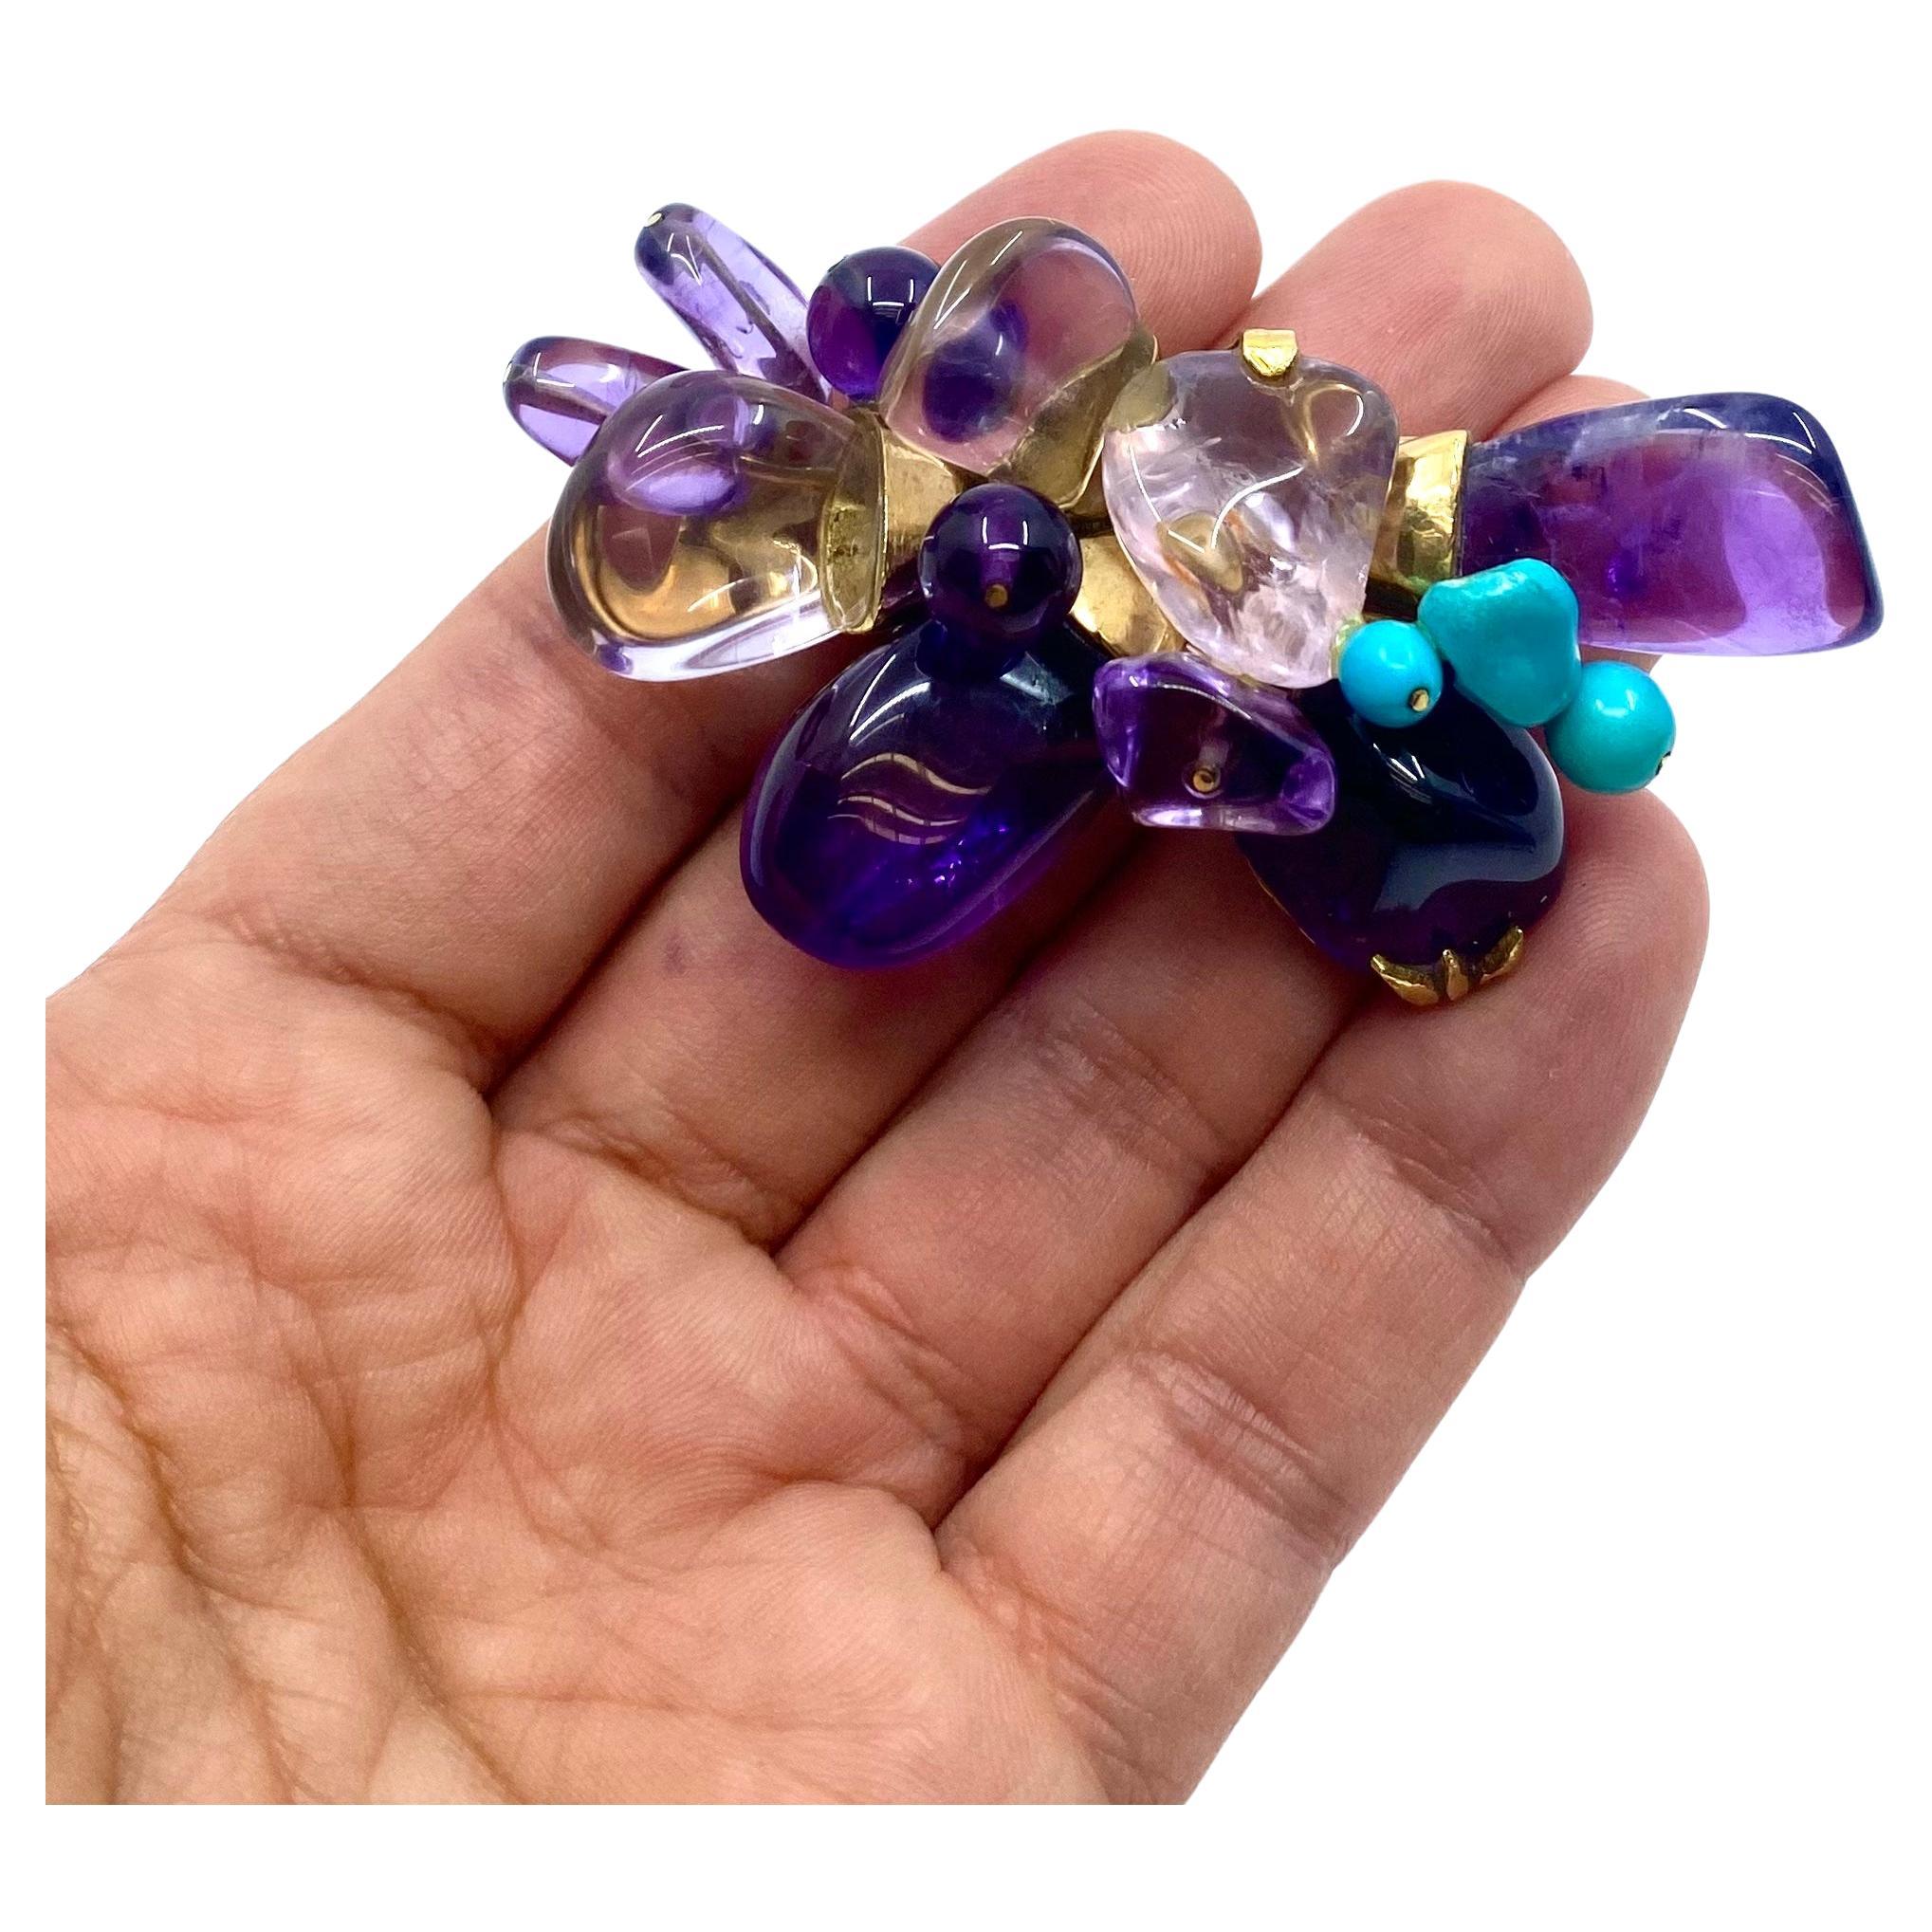 A gorgeous French brooch made of 18k gold, features amethyst and turquoise.  Designed as an abstract flower, the brooch has “petals” created from the freeform cabochon cut amethysts. Using various setting allowed placing the gems in different